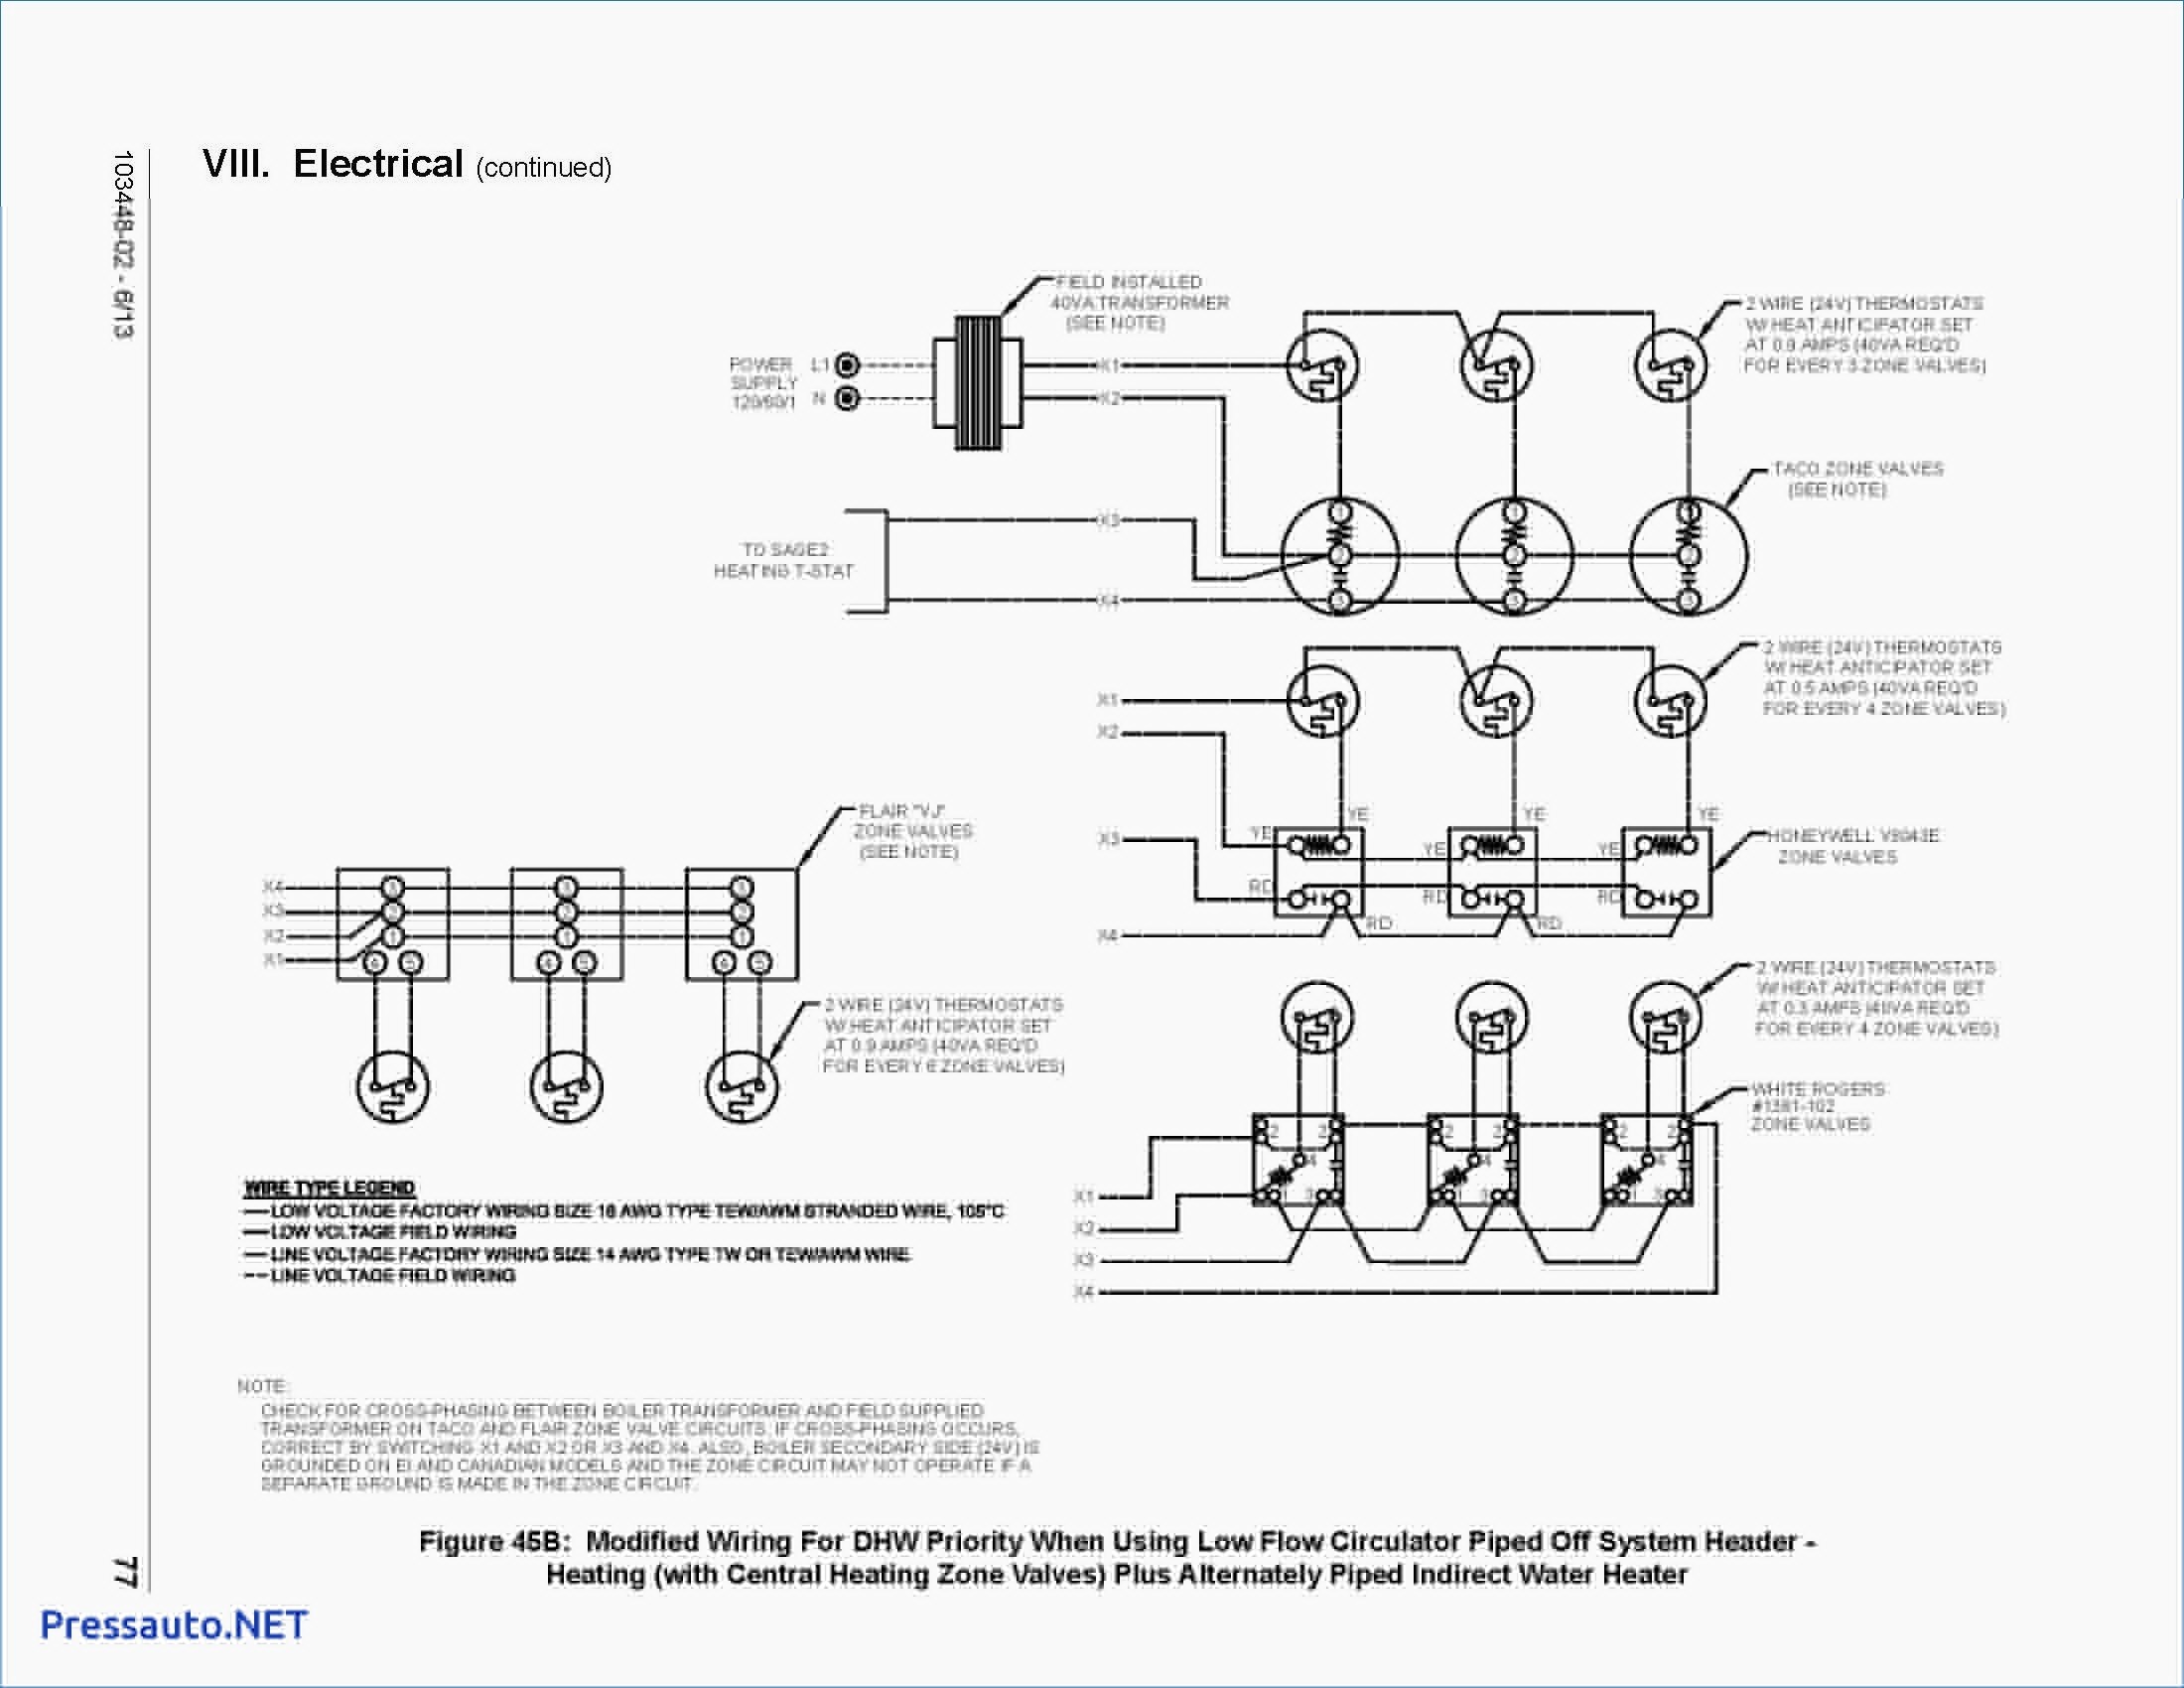 2 Wire Thermostat Home Wiring Diagram Wall Heat ly Full Image